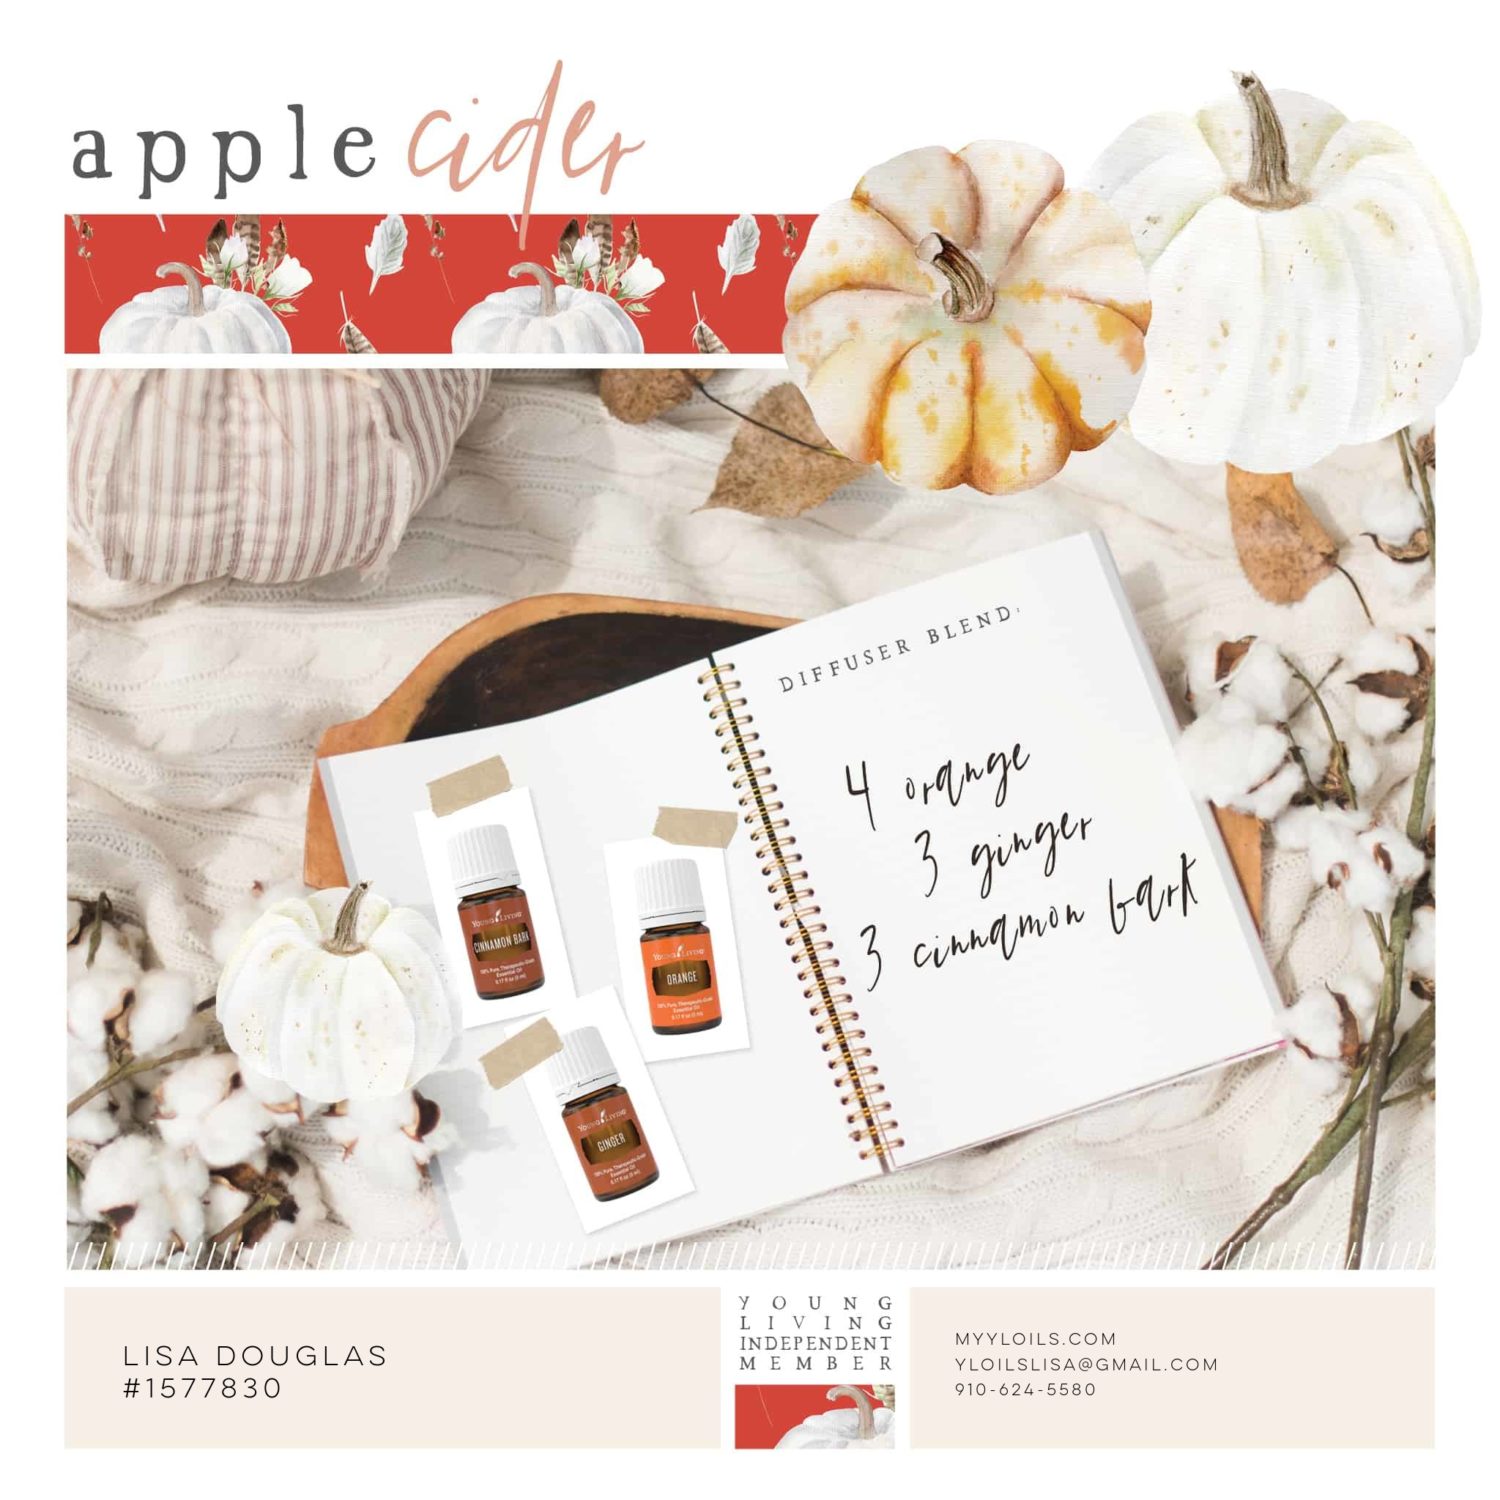 Apple Cider Young Living Diffuser Recipe